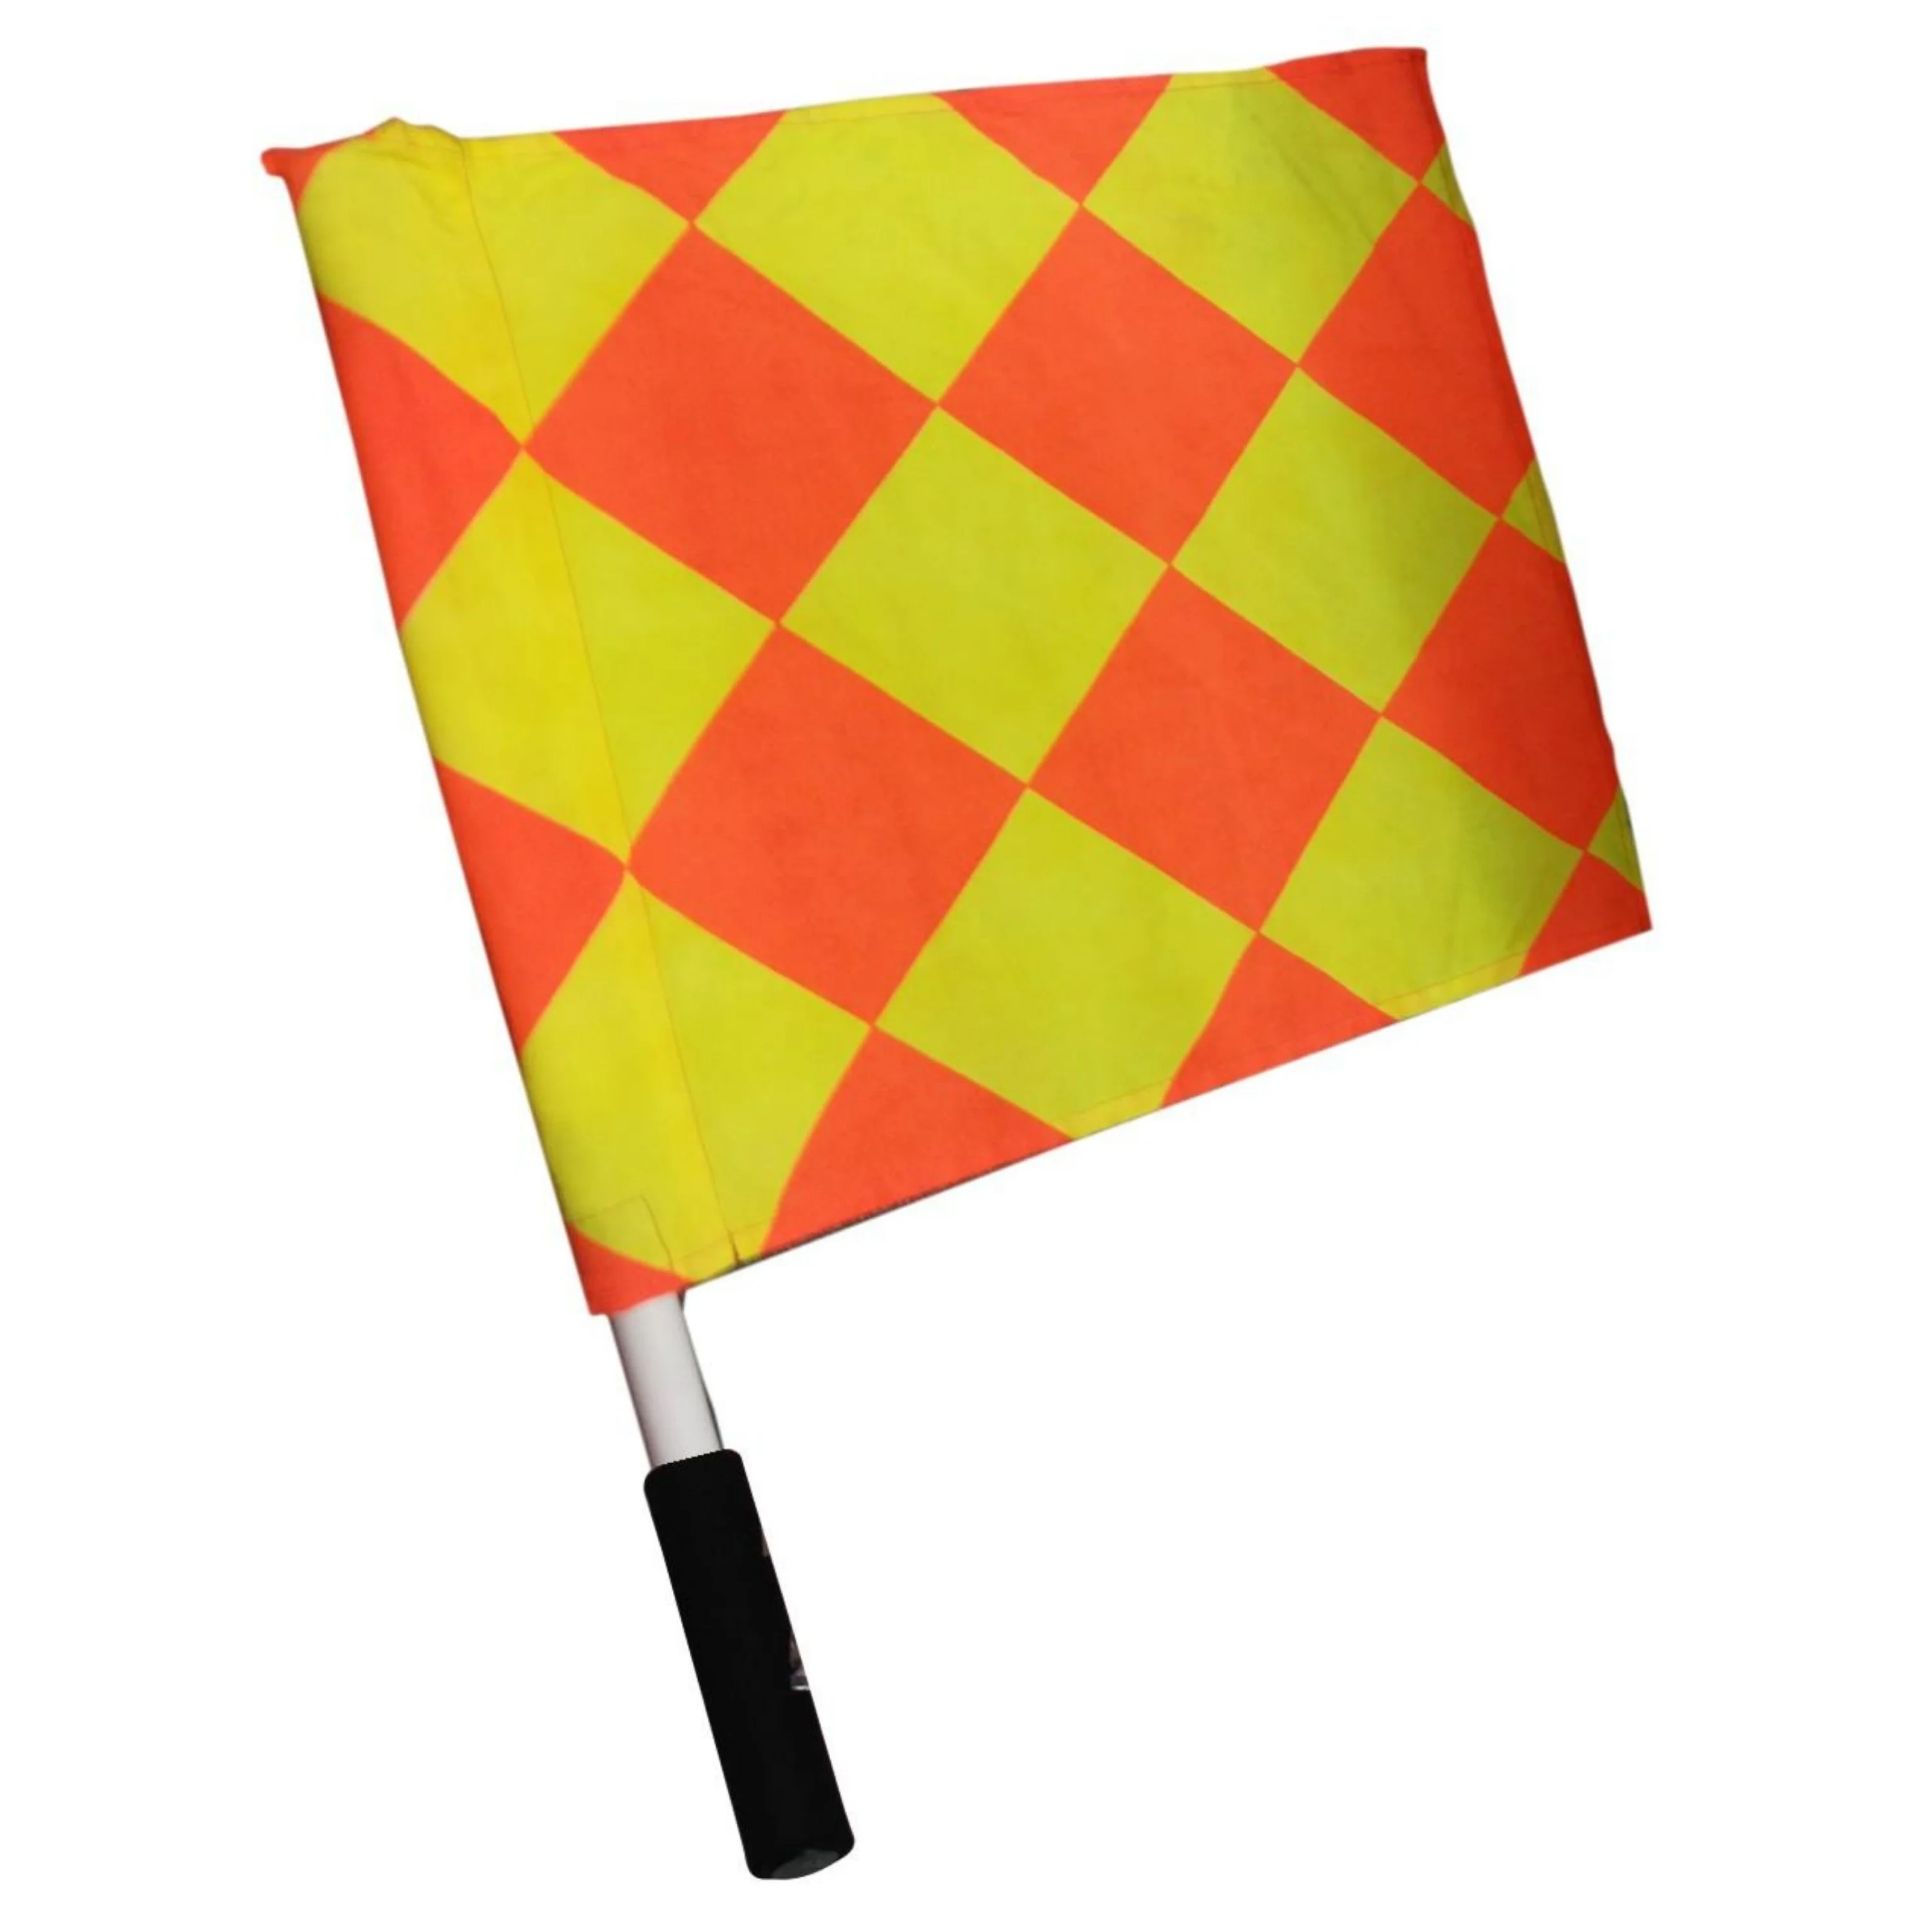 Abaodam Referee Flags Competition Soccer Linesman Flag Sport Training Referee FlagsProduct